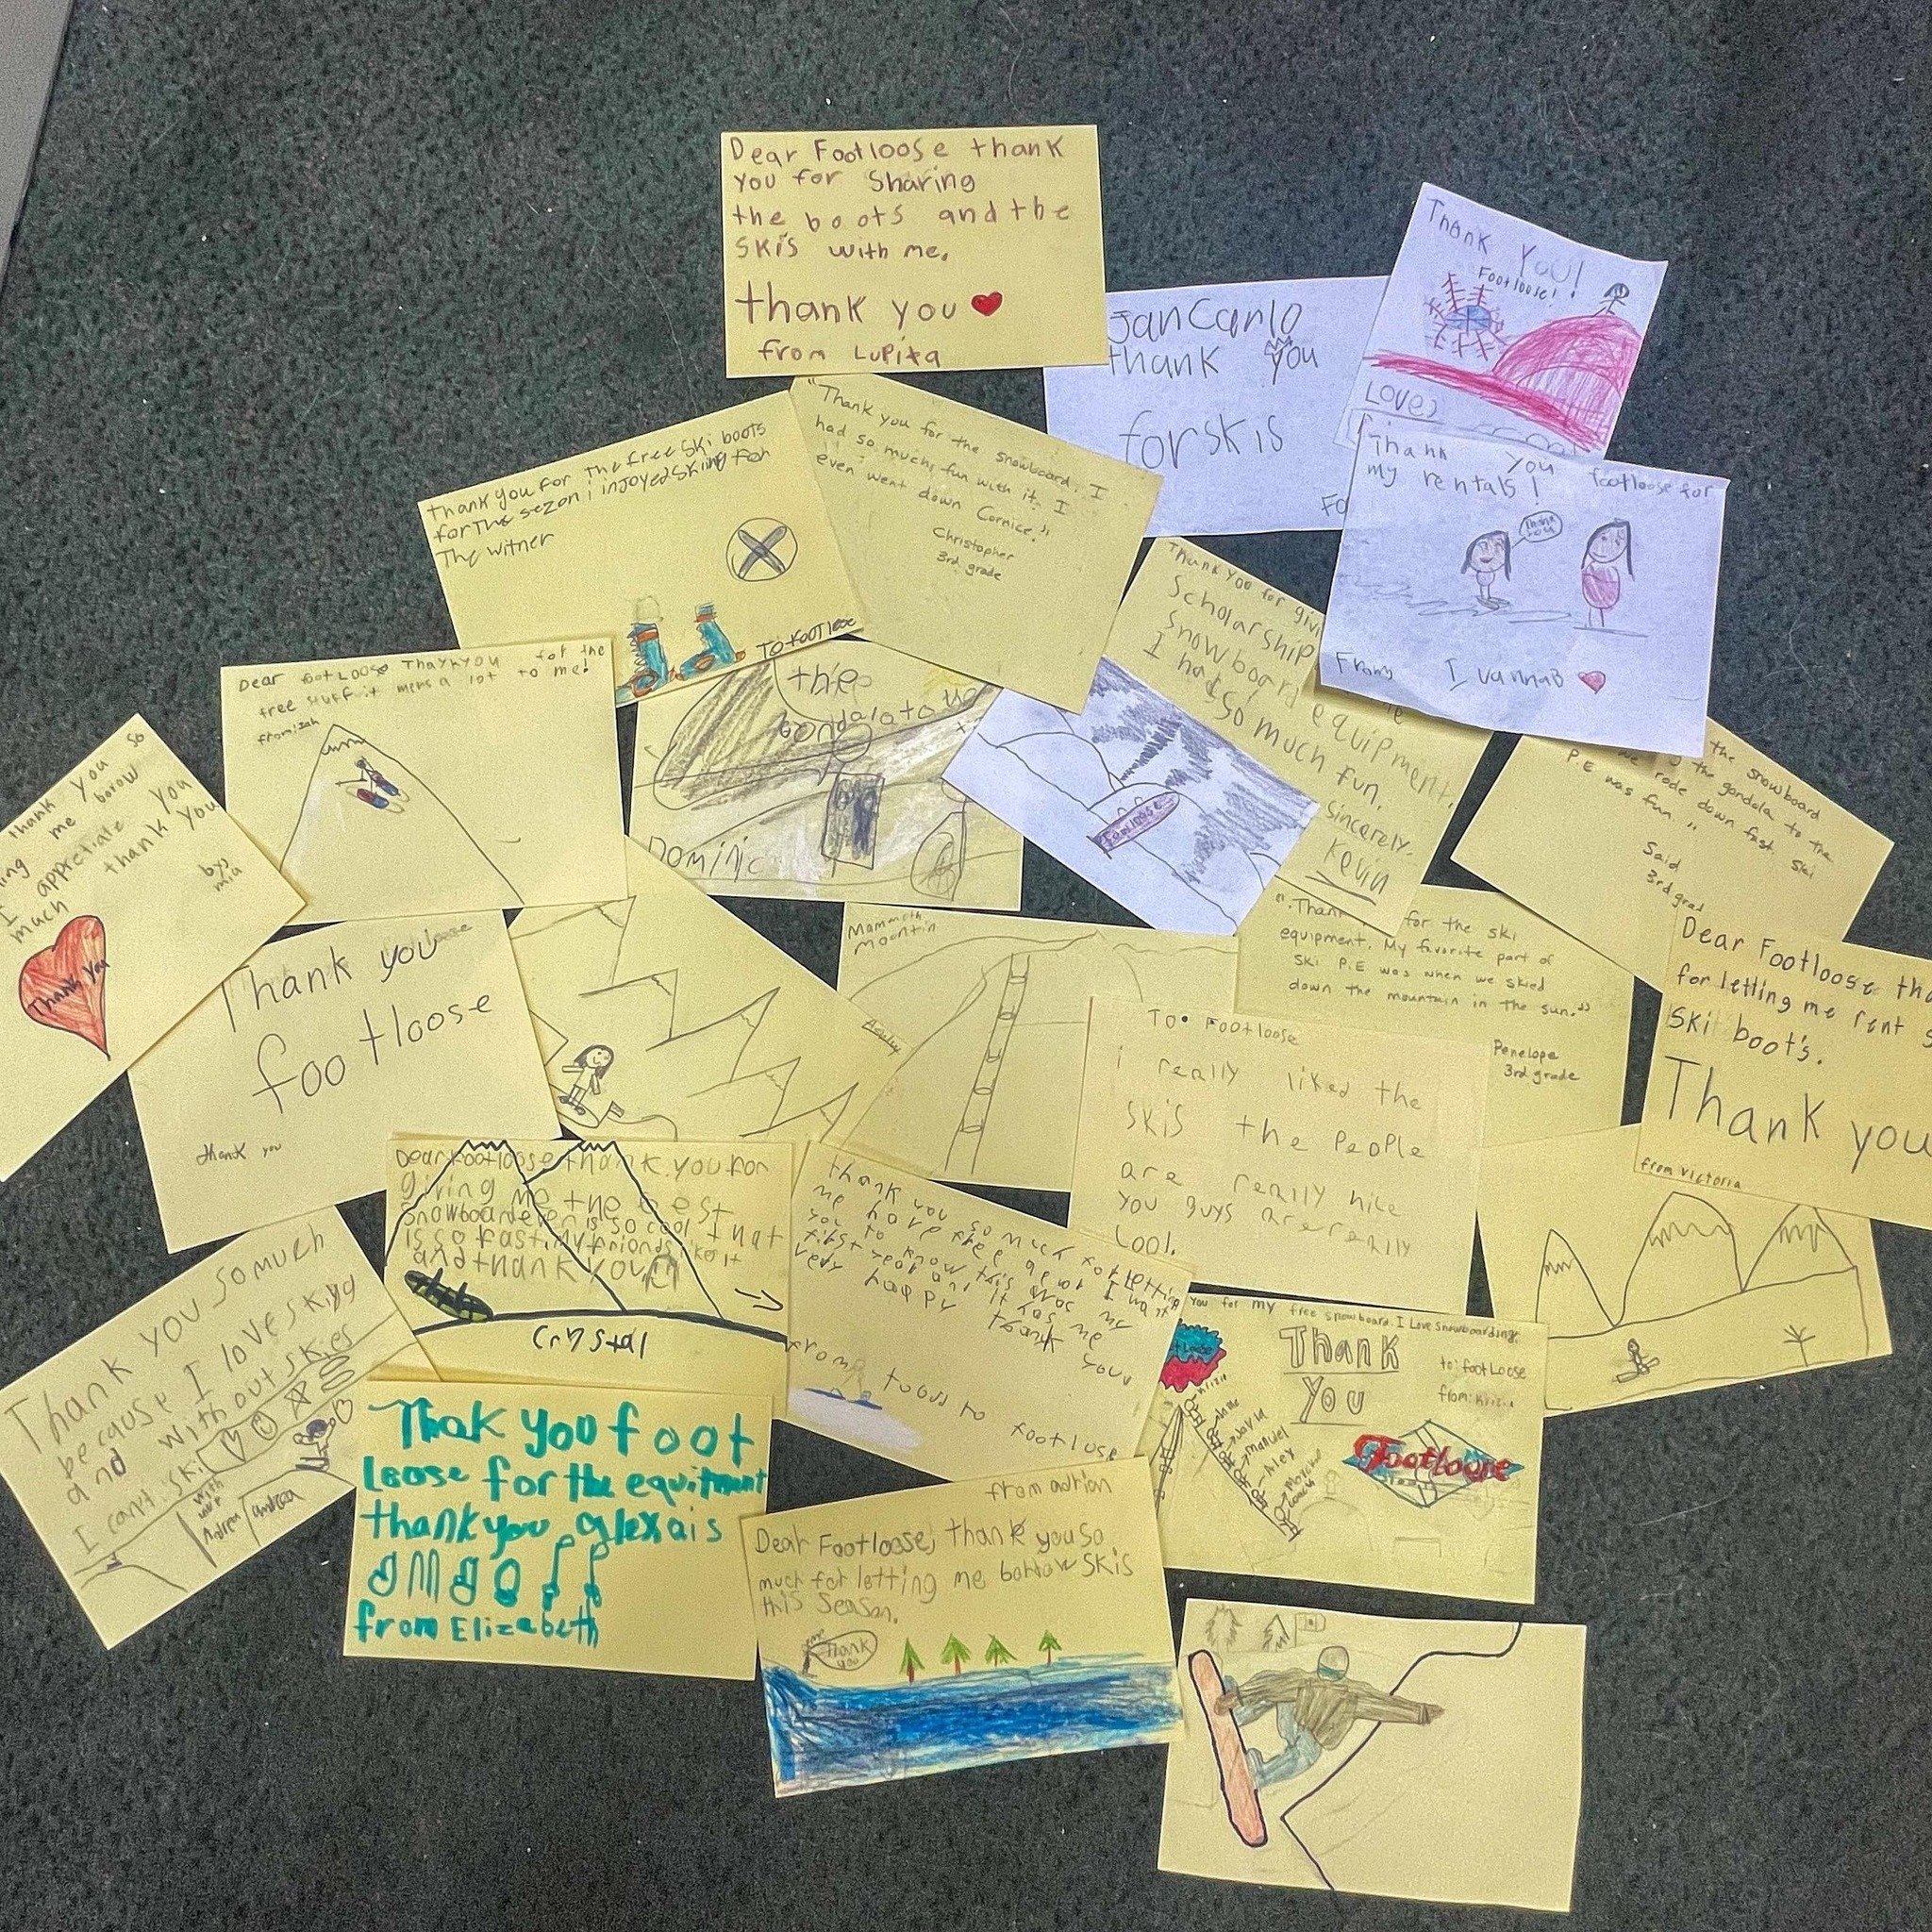 The absolute cutest thank you cards we&rsquo;ve ever received from Mammoth Elementary School. This year we provided a large amount of ski and snowboard rentals to any child that needed it for Ski PE. We are so happy that we could make this happen and